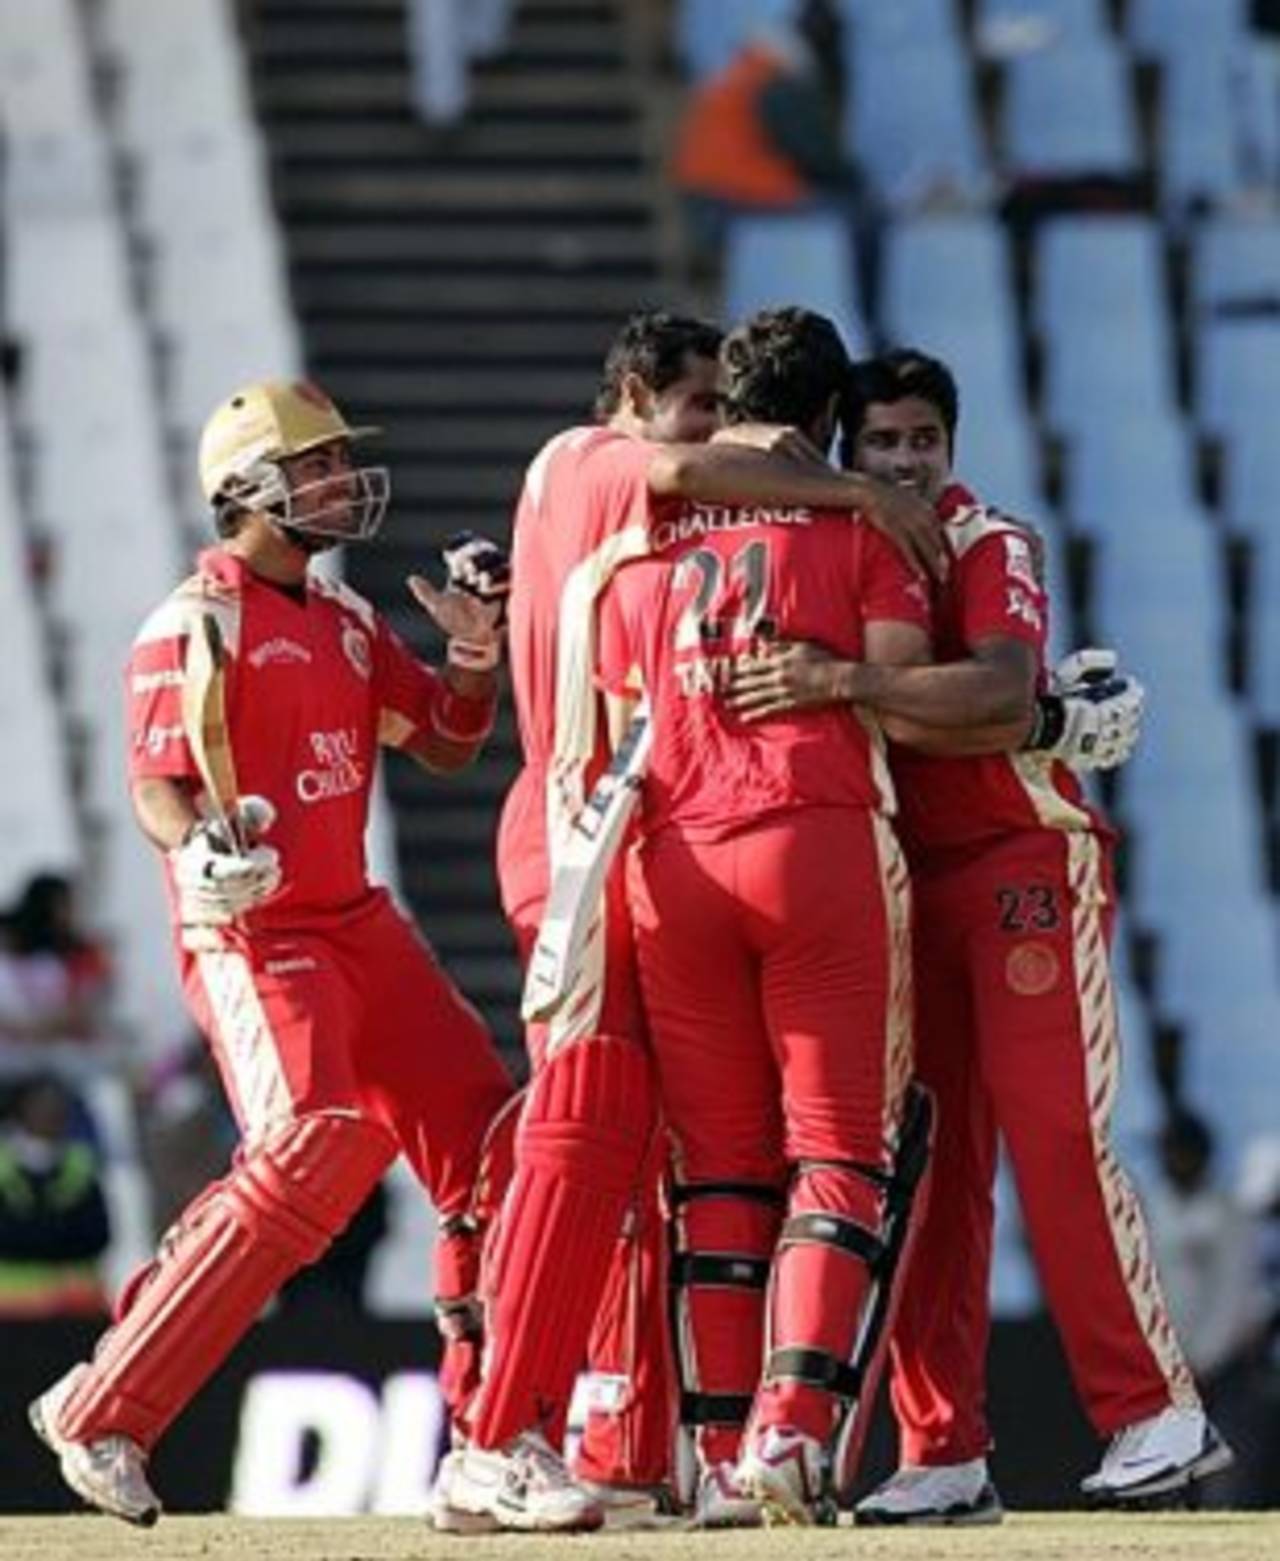 Ross Taylor is mobbed by his team-mates after leading his team to a tense win, Kolkata Knight Riders v Royal Challengers Bangalore, IPL, Centurion, May 12, 2009